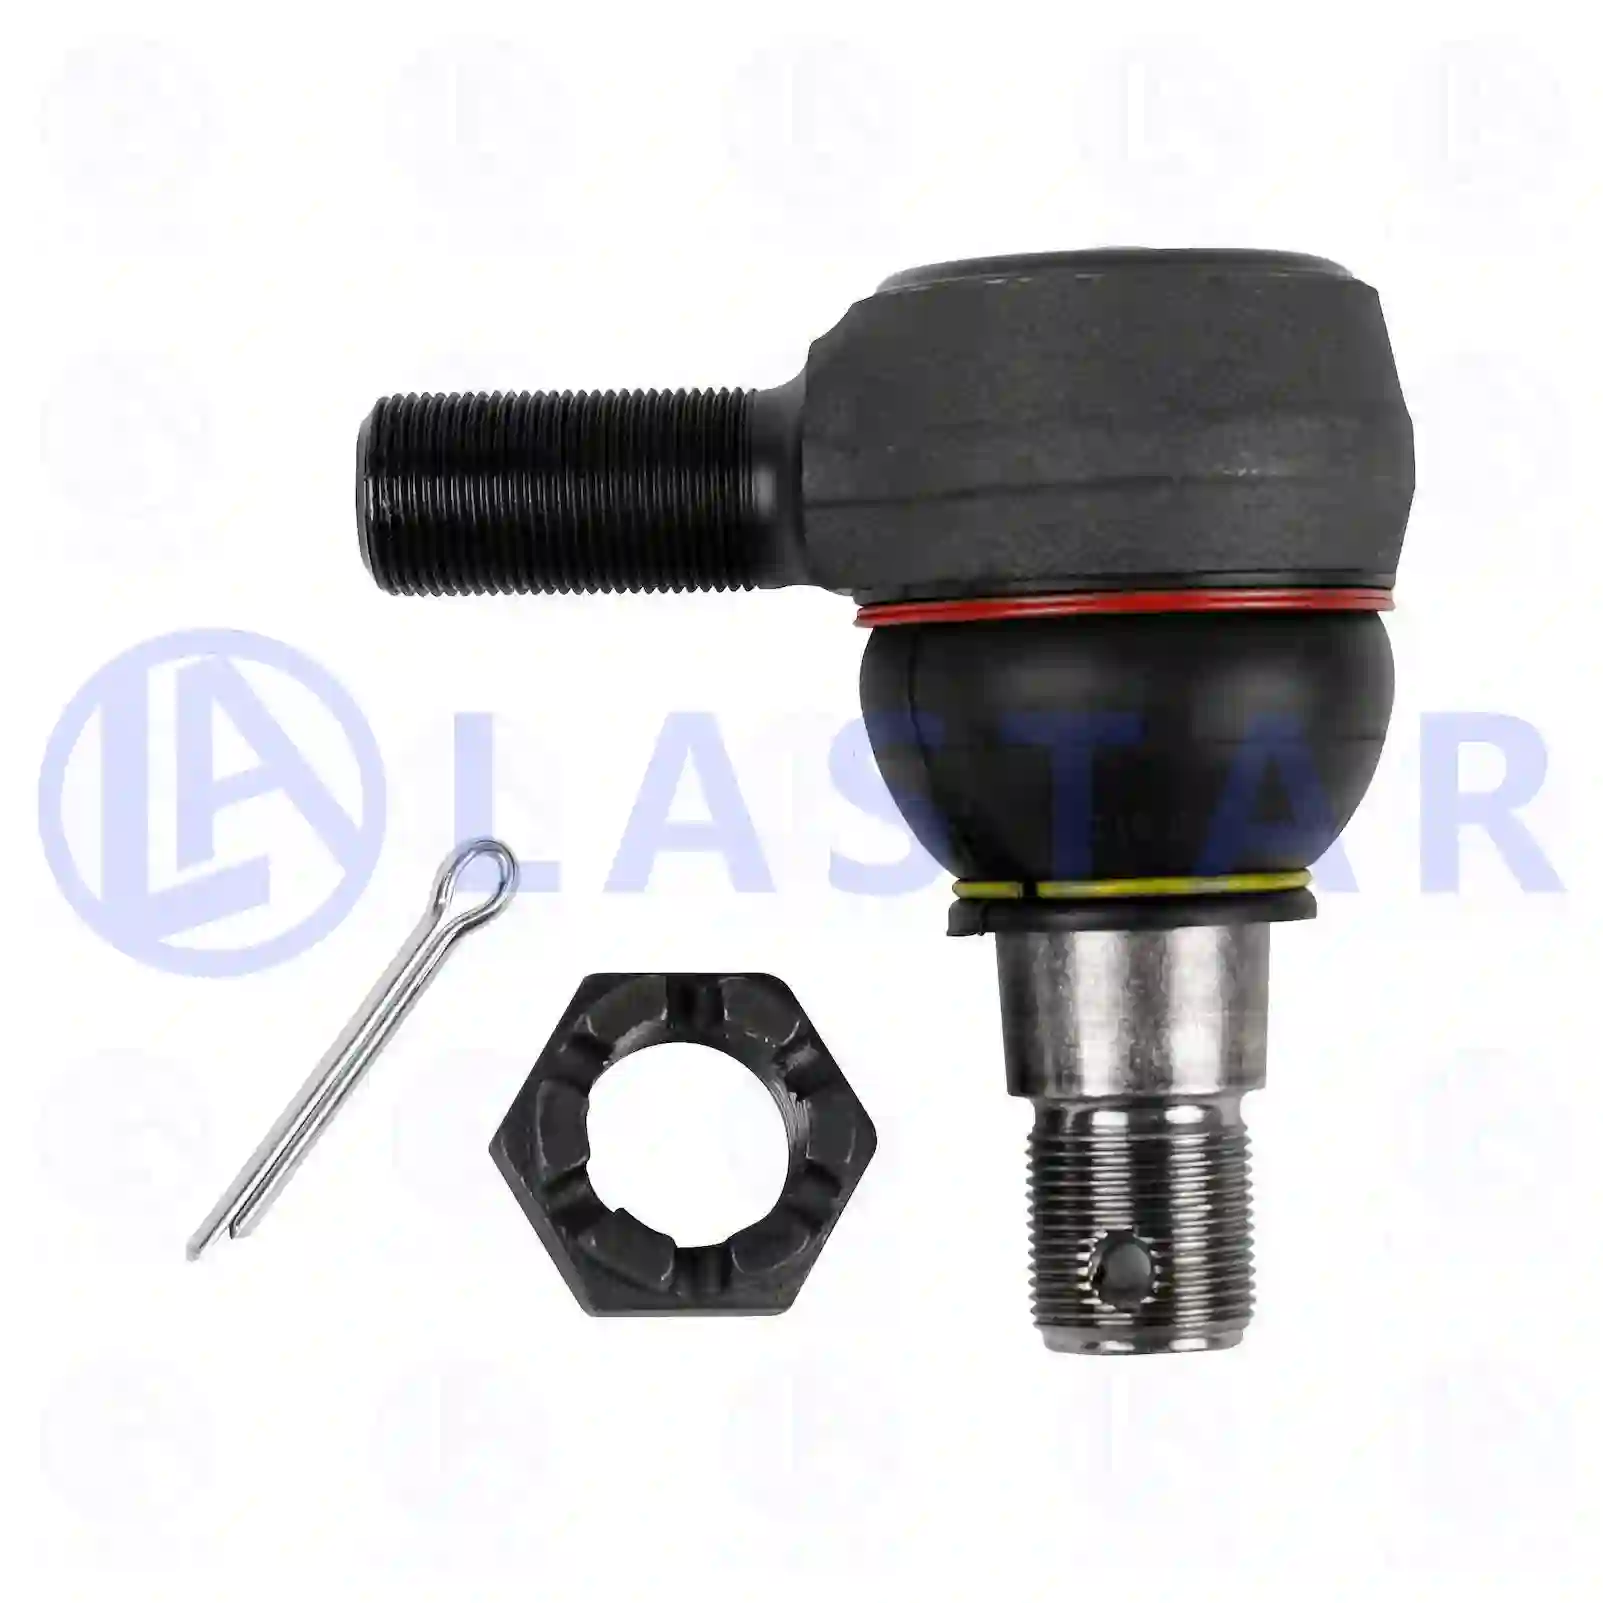 Ball joint, right hand thread, 77705668, 0648637, 1399725, 648637 ||  77705668 Lastar Spare Part | Truck Spare Parts, Auotomotive Spare Parts Ball joint, right hand thread, 77705668, 0648637, 1399725, 648637 ||  77705668 Lastar Spare Part | Truck Spare Parts, Auotomotive Spare Parts